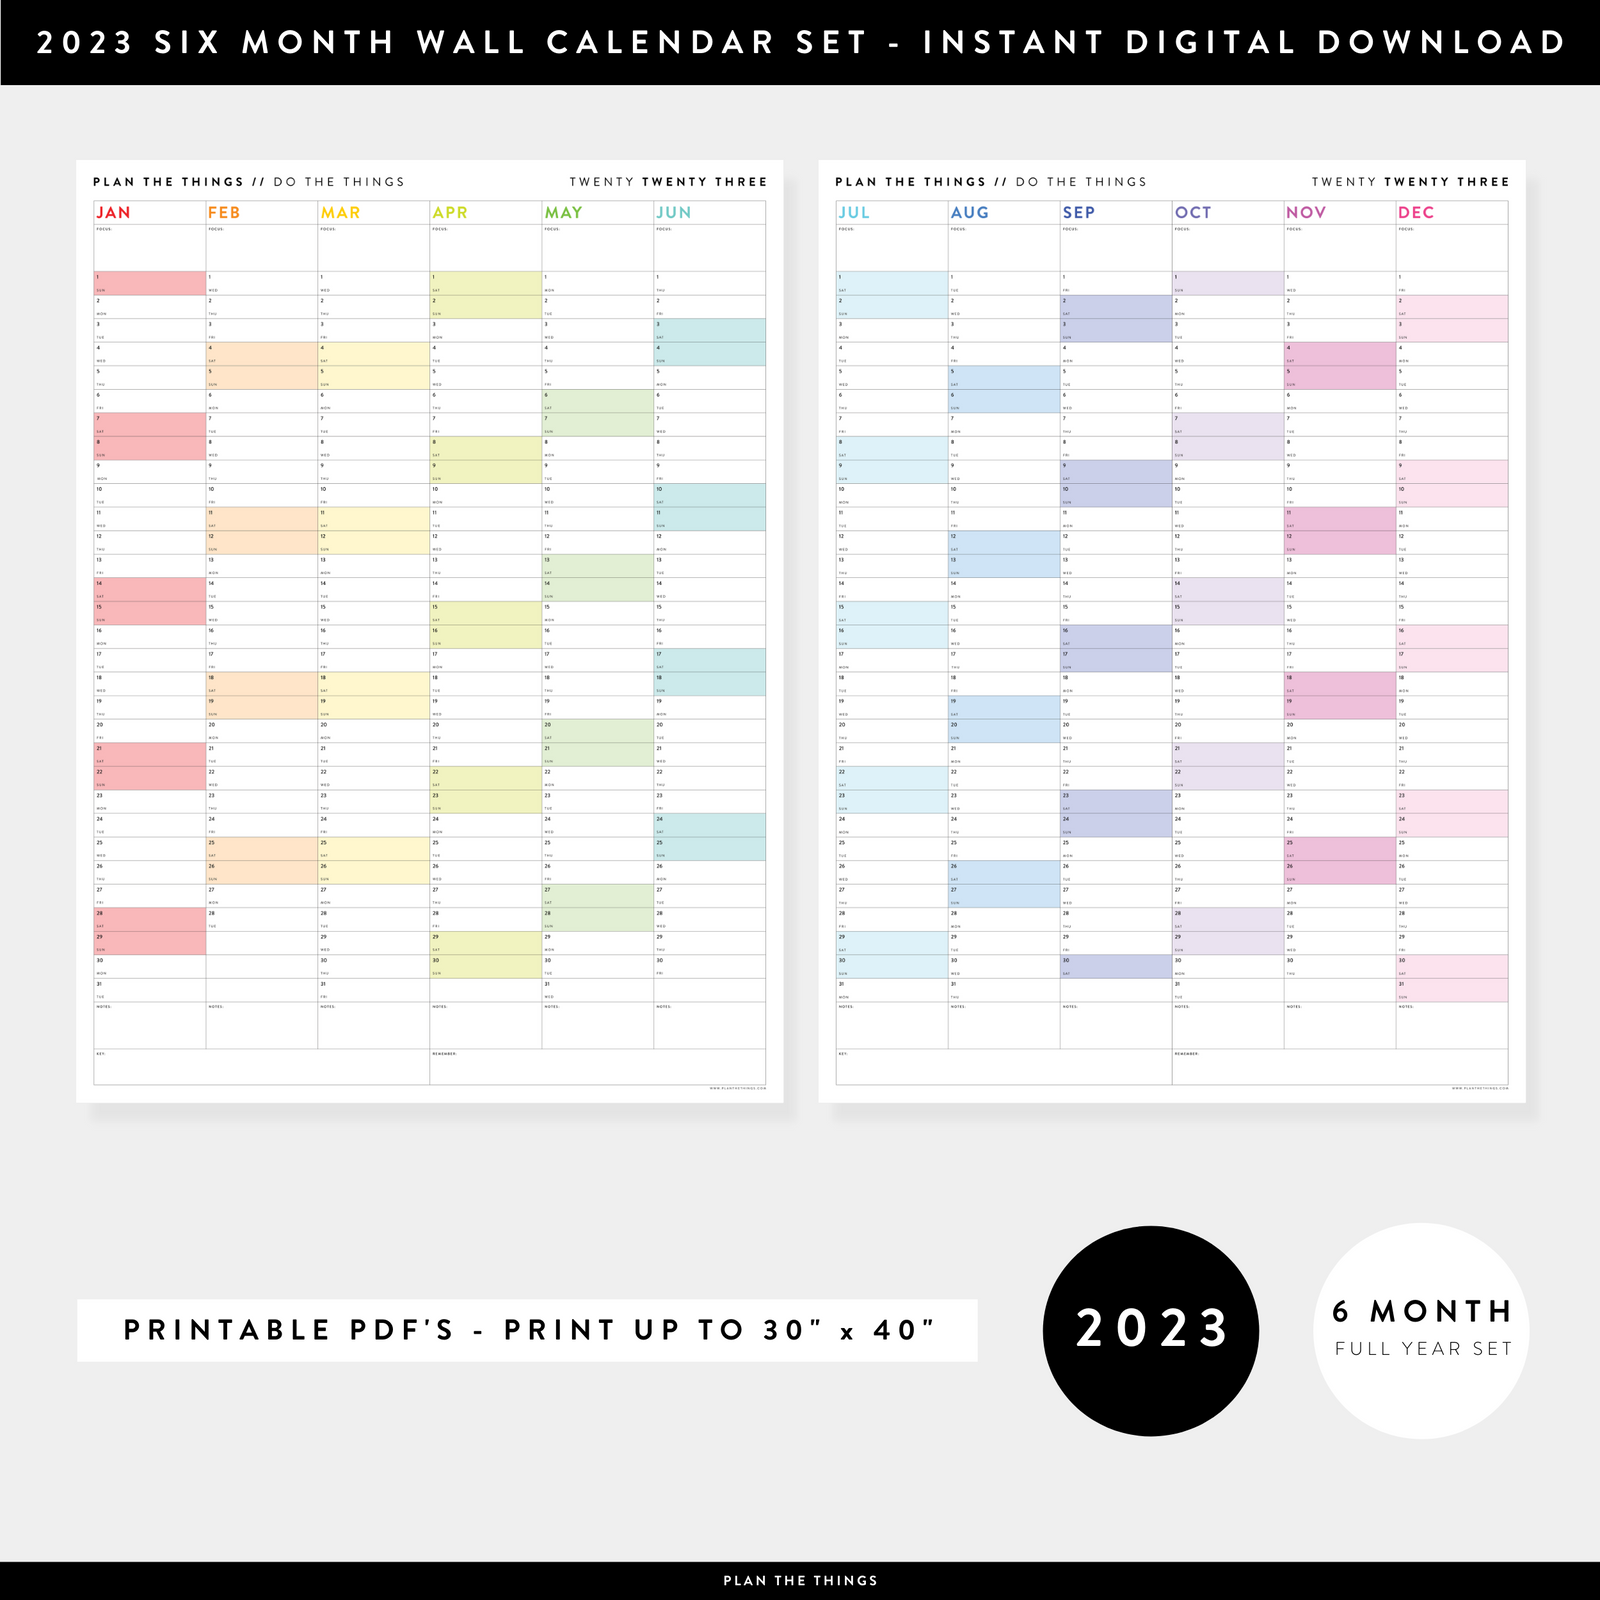 Printable 2023 Six Month Calendar Set - Full Year // Instant Download -  Plan The Things